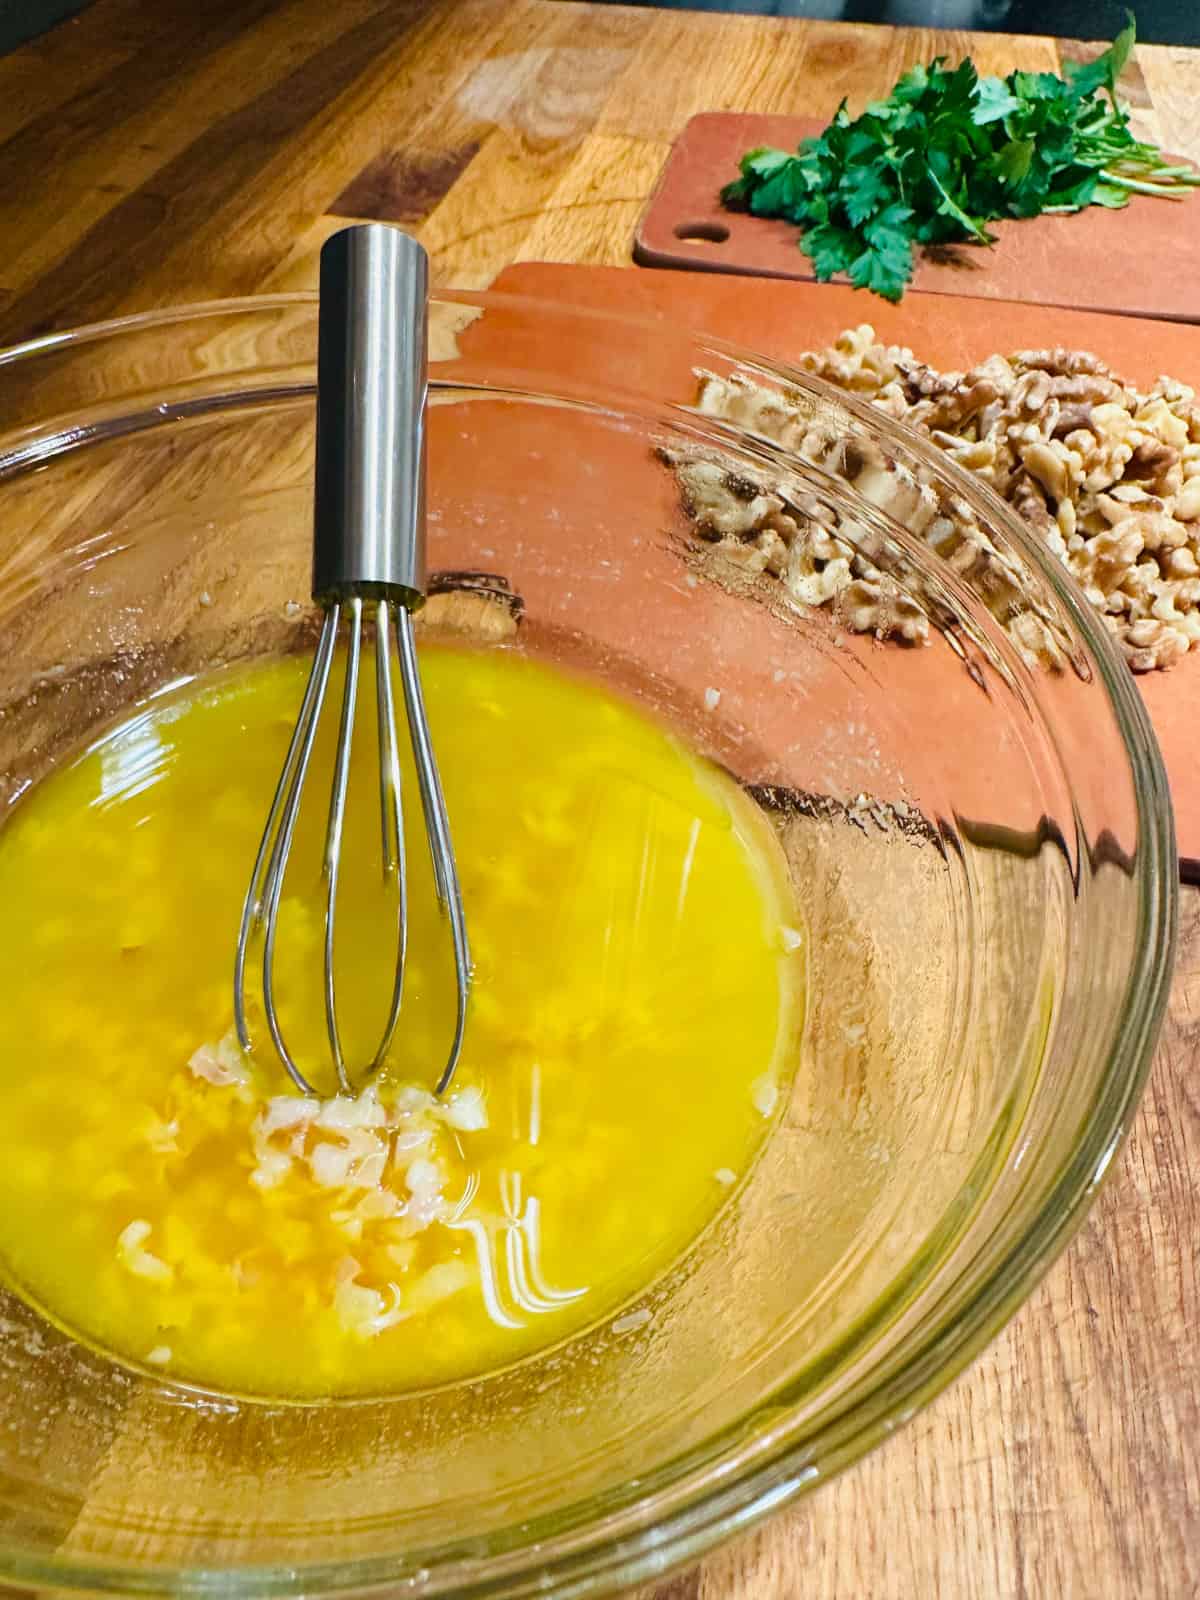 Yellow colored dressing in a glass bowl with a metal whisk in front of walnuts and parsley on wood cutting boards.